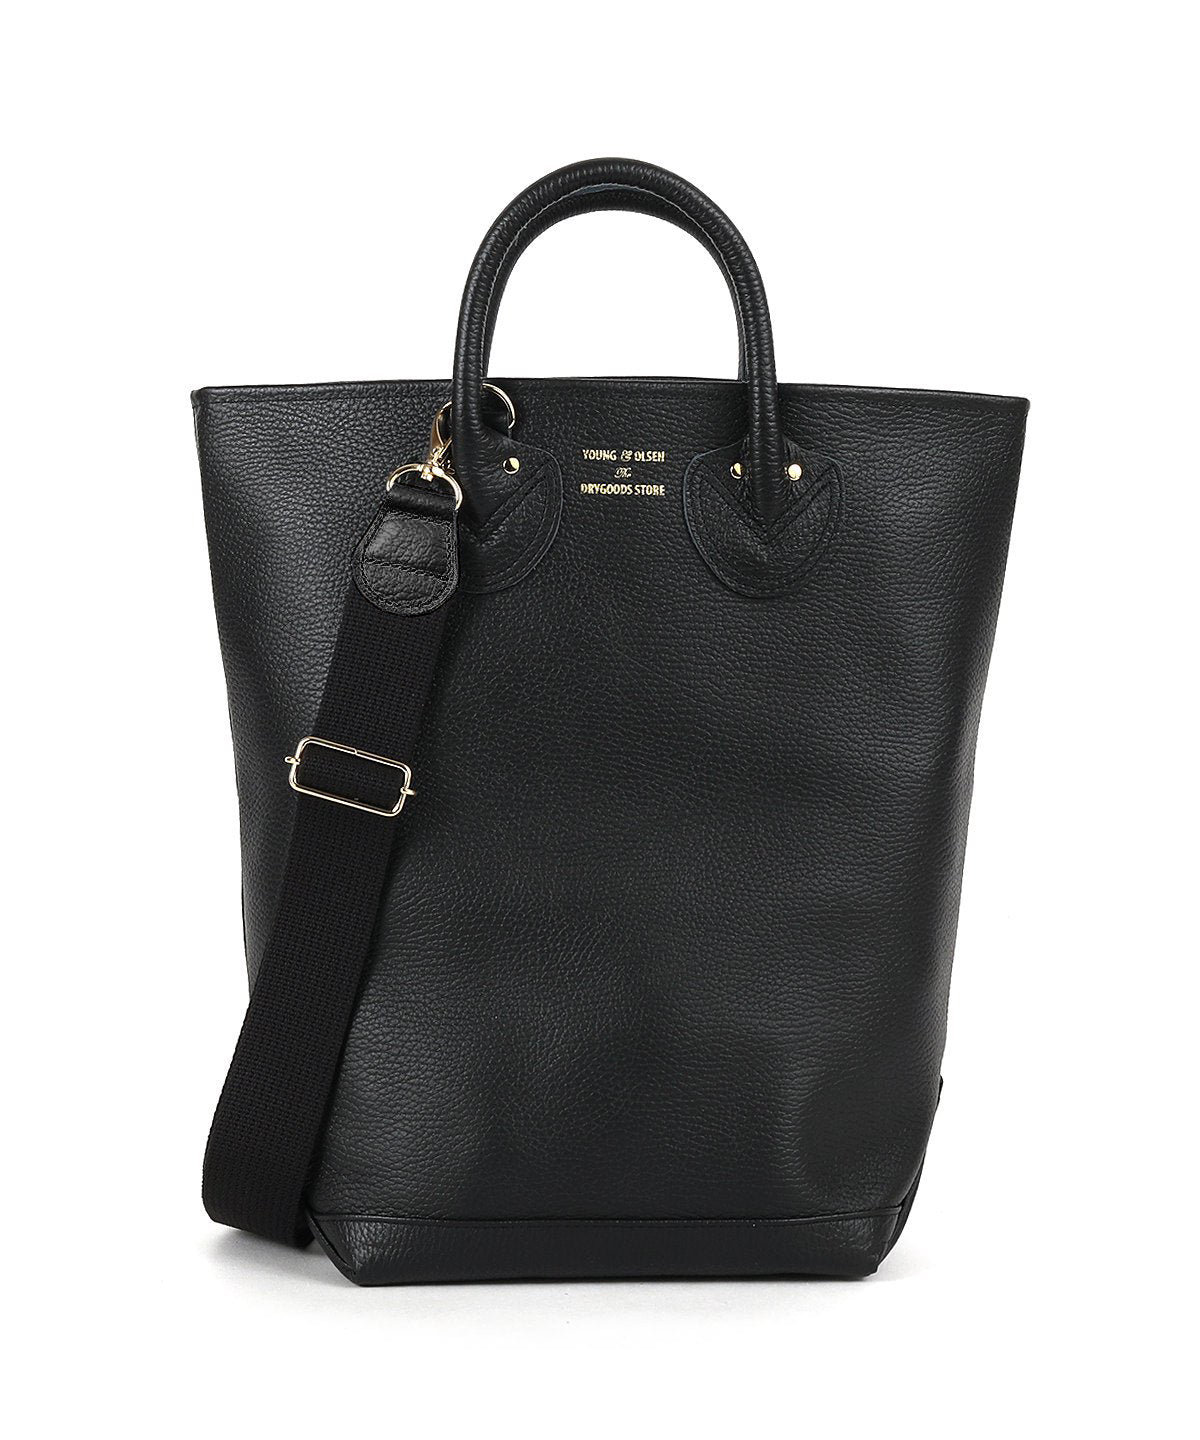 YOUNG\u0026OLSEN EMBOSSED LEATHER TOTE BAGバッグ